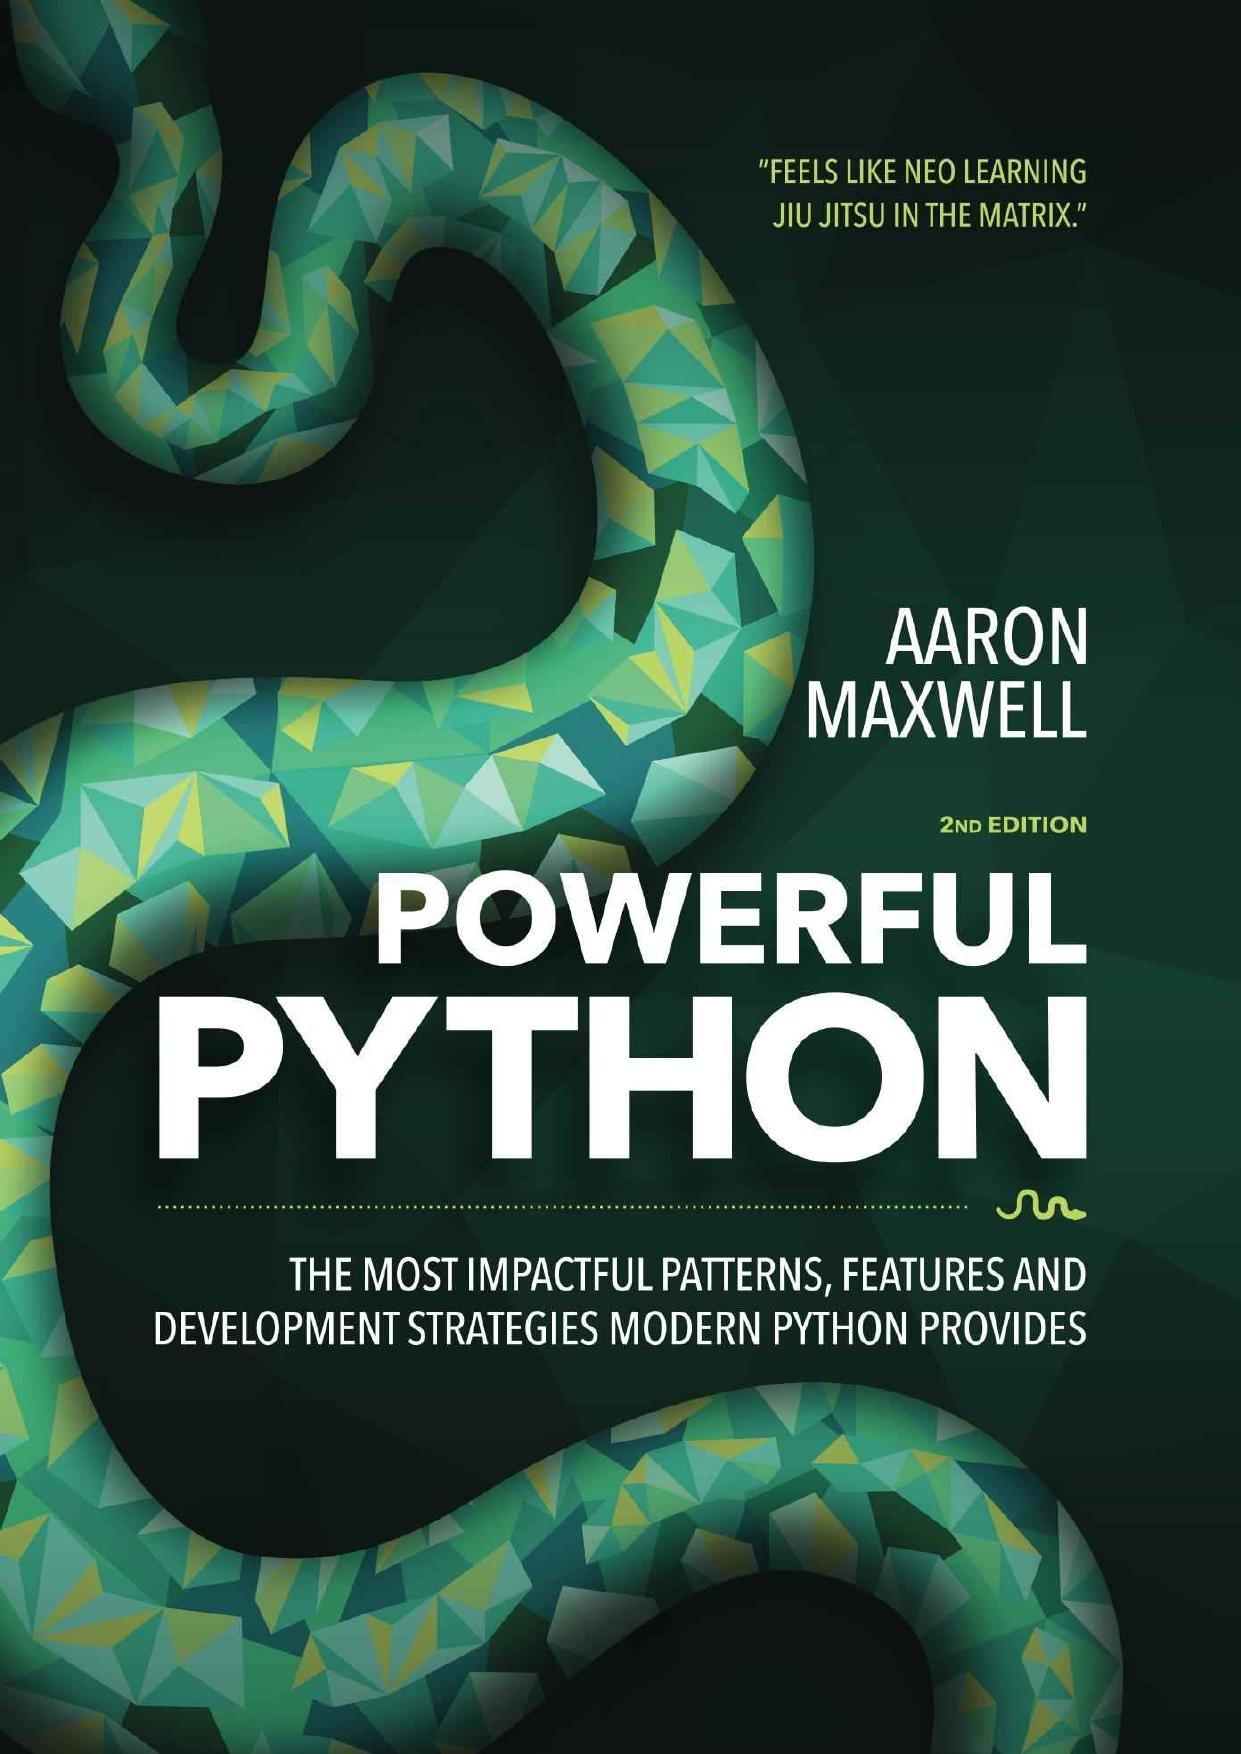 Powerful Python The Most Impactful Patterns, Features, and Development Strategies Modern Python Provides